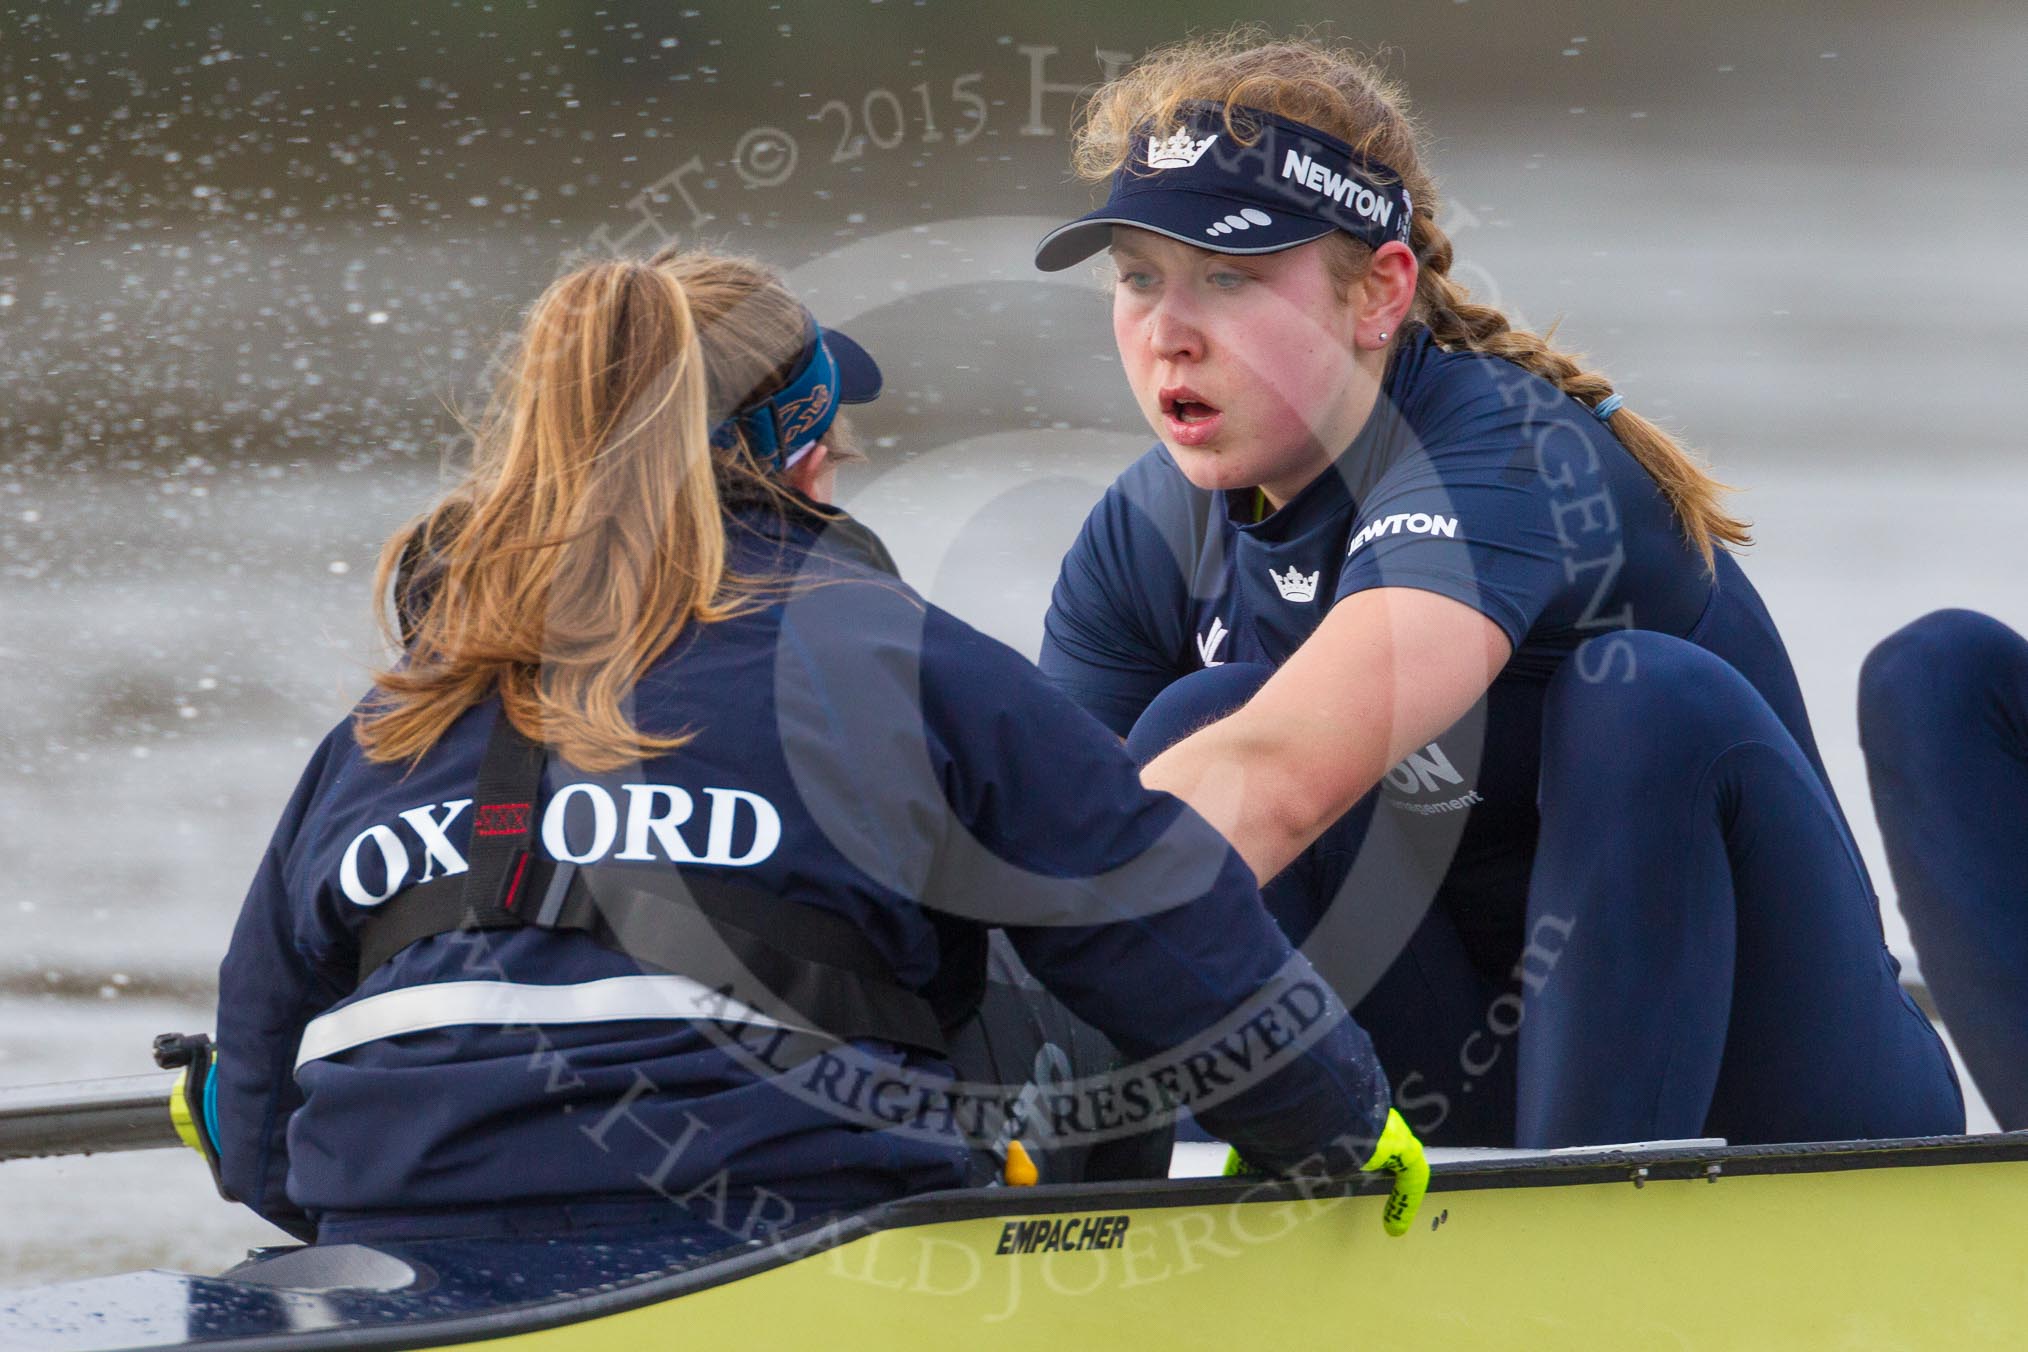 The Boat Race season 2016 - Women's Boat Race Trial Eights (OUWBC, Oxford): "Charybdis" , here cox-Morgan Baynham-Williams, stroke-Kate Erickson.
River Thames between Putney Bridge and Mortlake,
London SW15,

United Kingdom,
on 10 December 2015 at 12:26, image #217